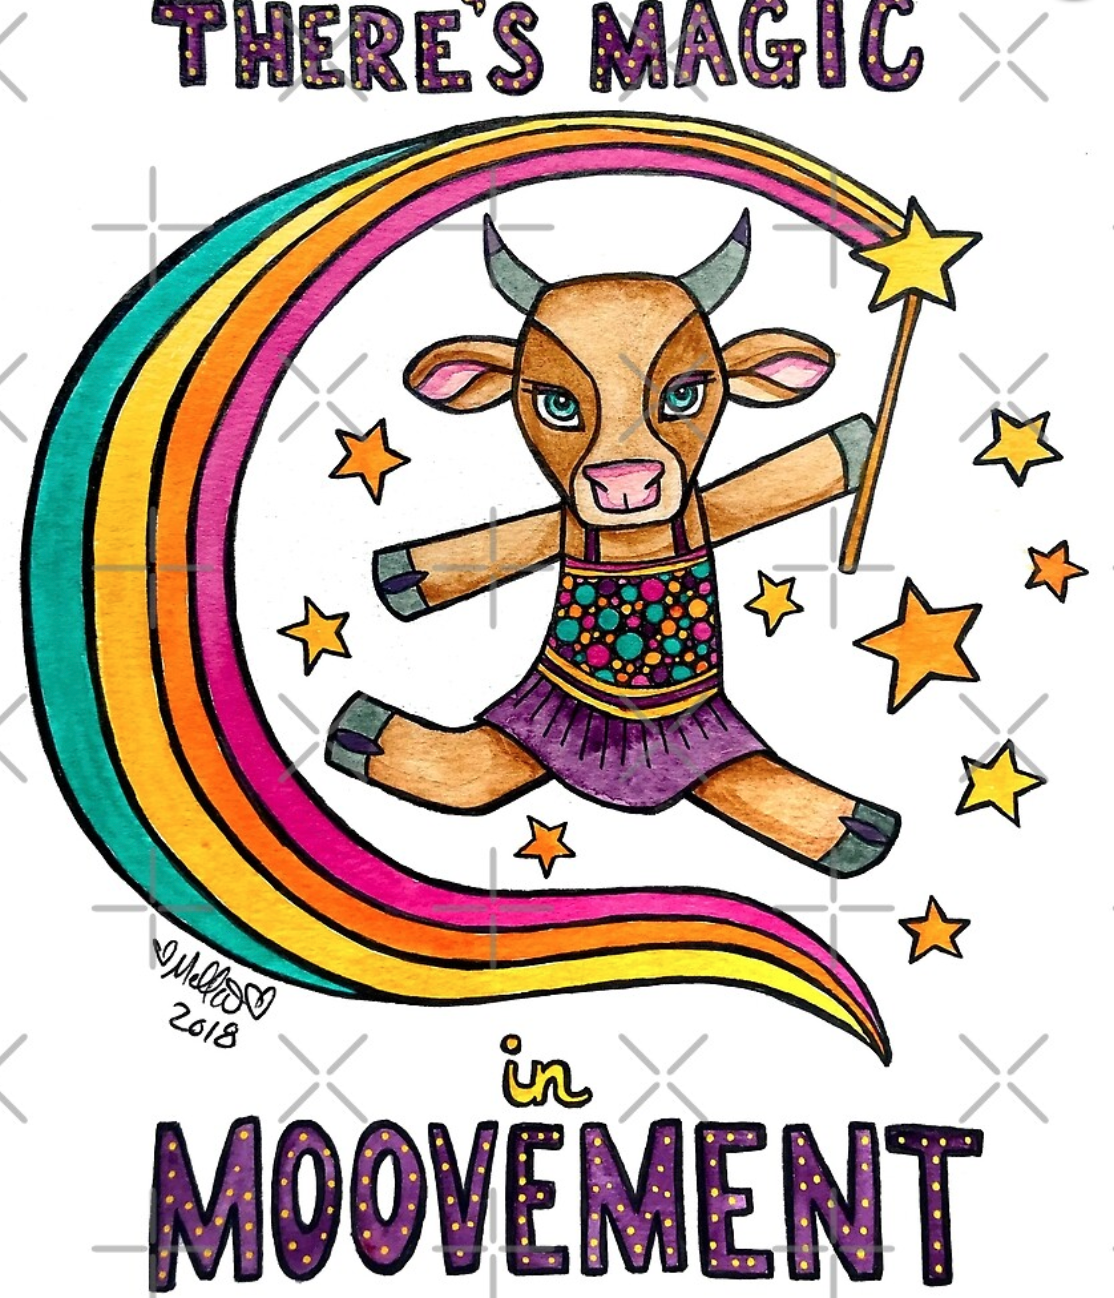 Animals of Inspiration: There's Magic in Moo-vement: Cow Illustration